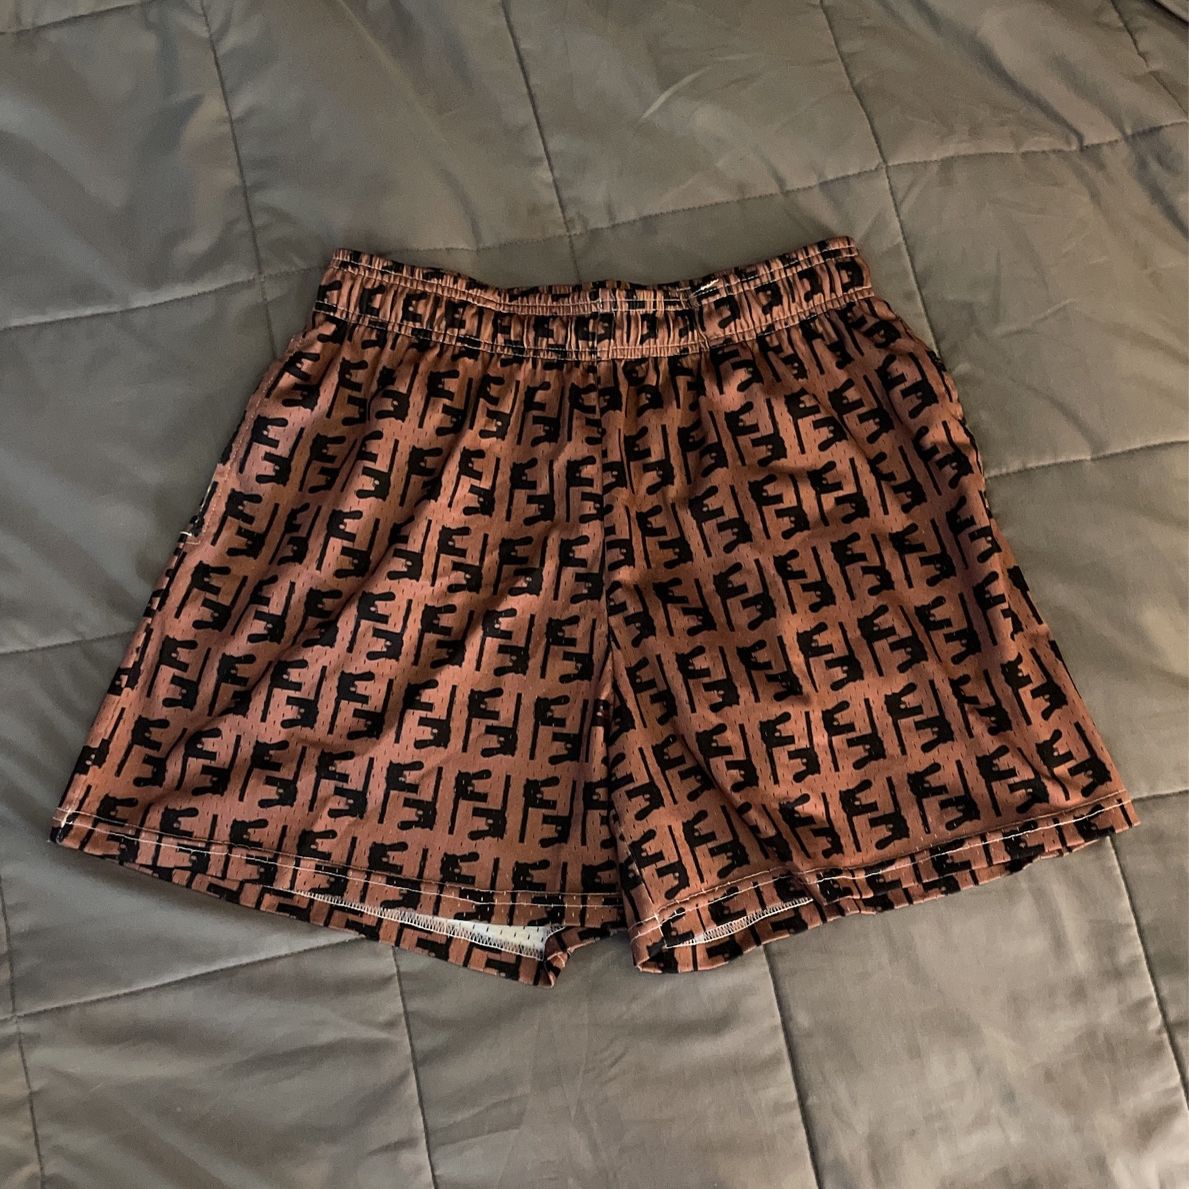 bravest studios la shorts for Sale in Los Angeles, CA - OfferUp